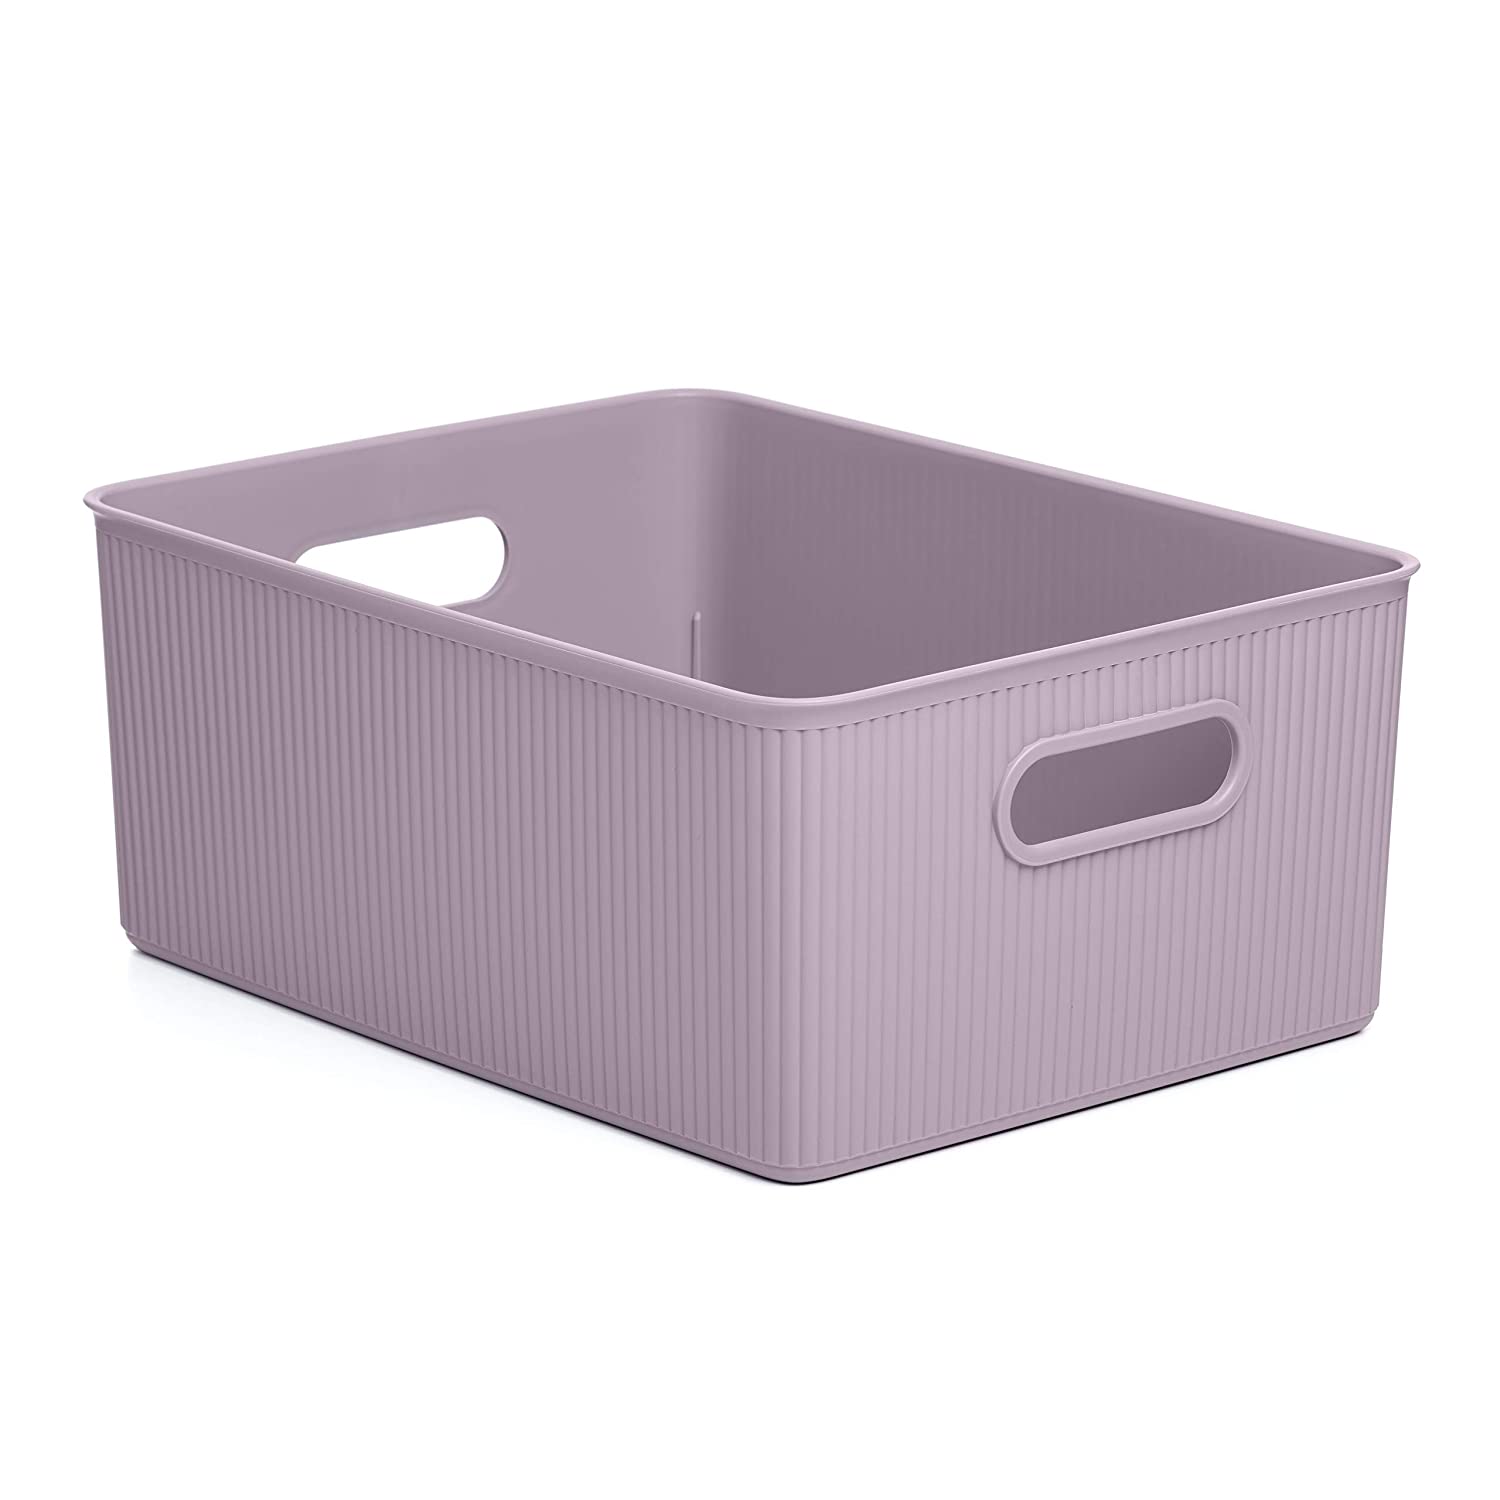  Superio Storage Bins with Lids- Clear Boxes for